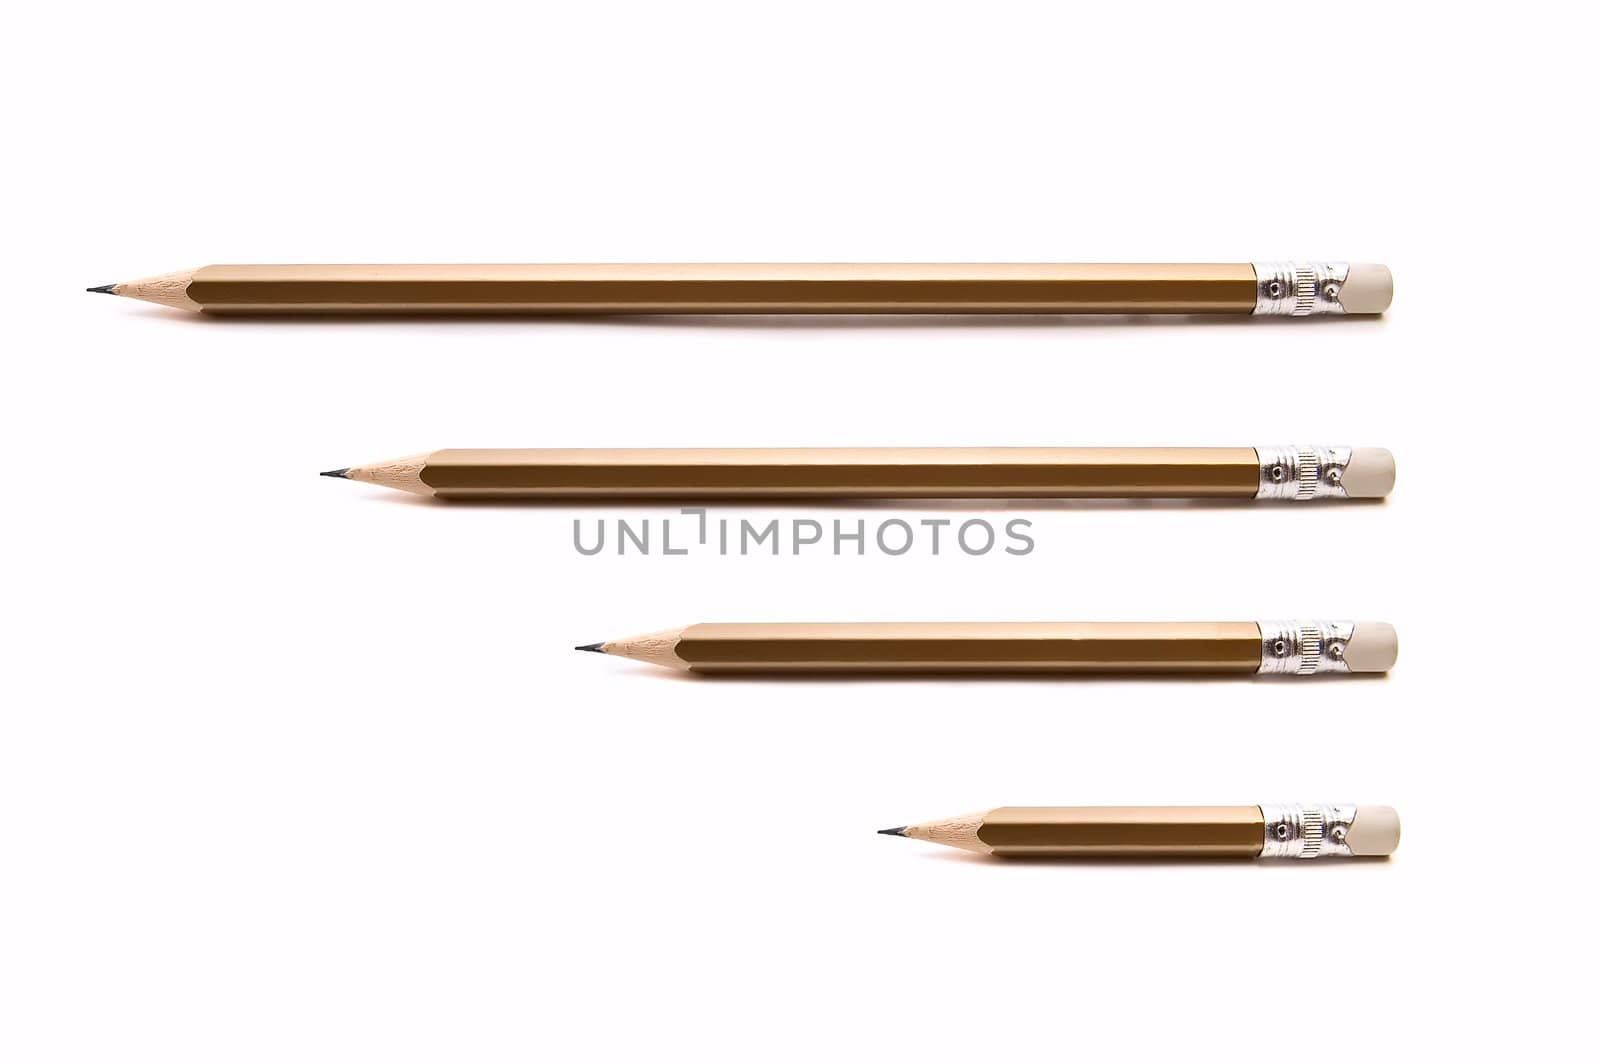 Four pencils different size on white background